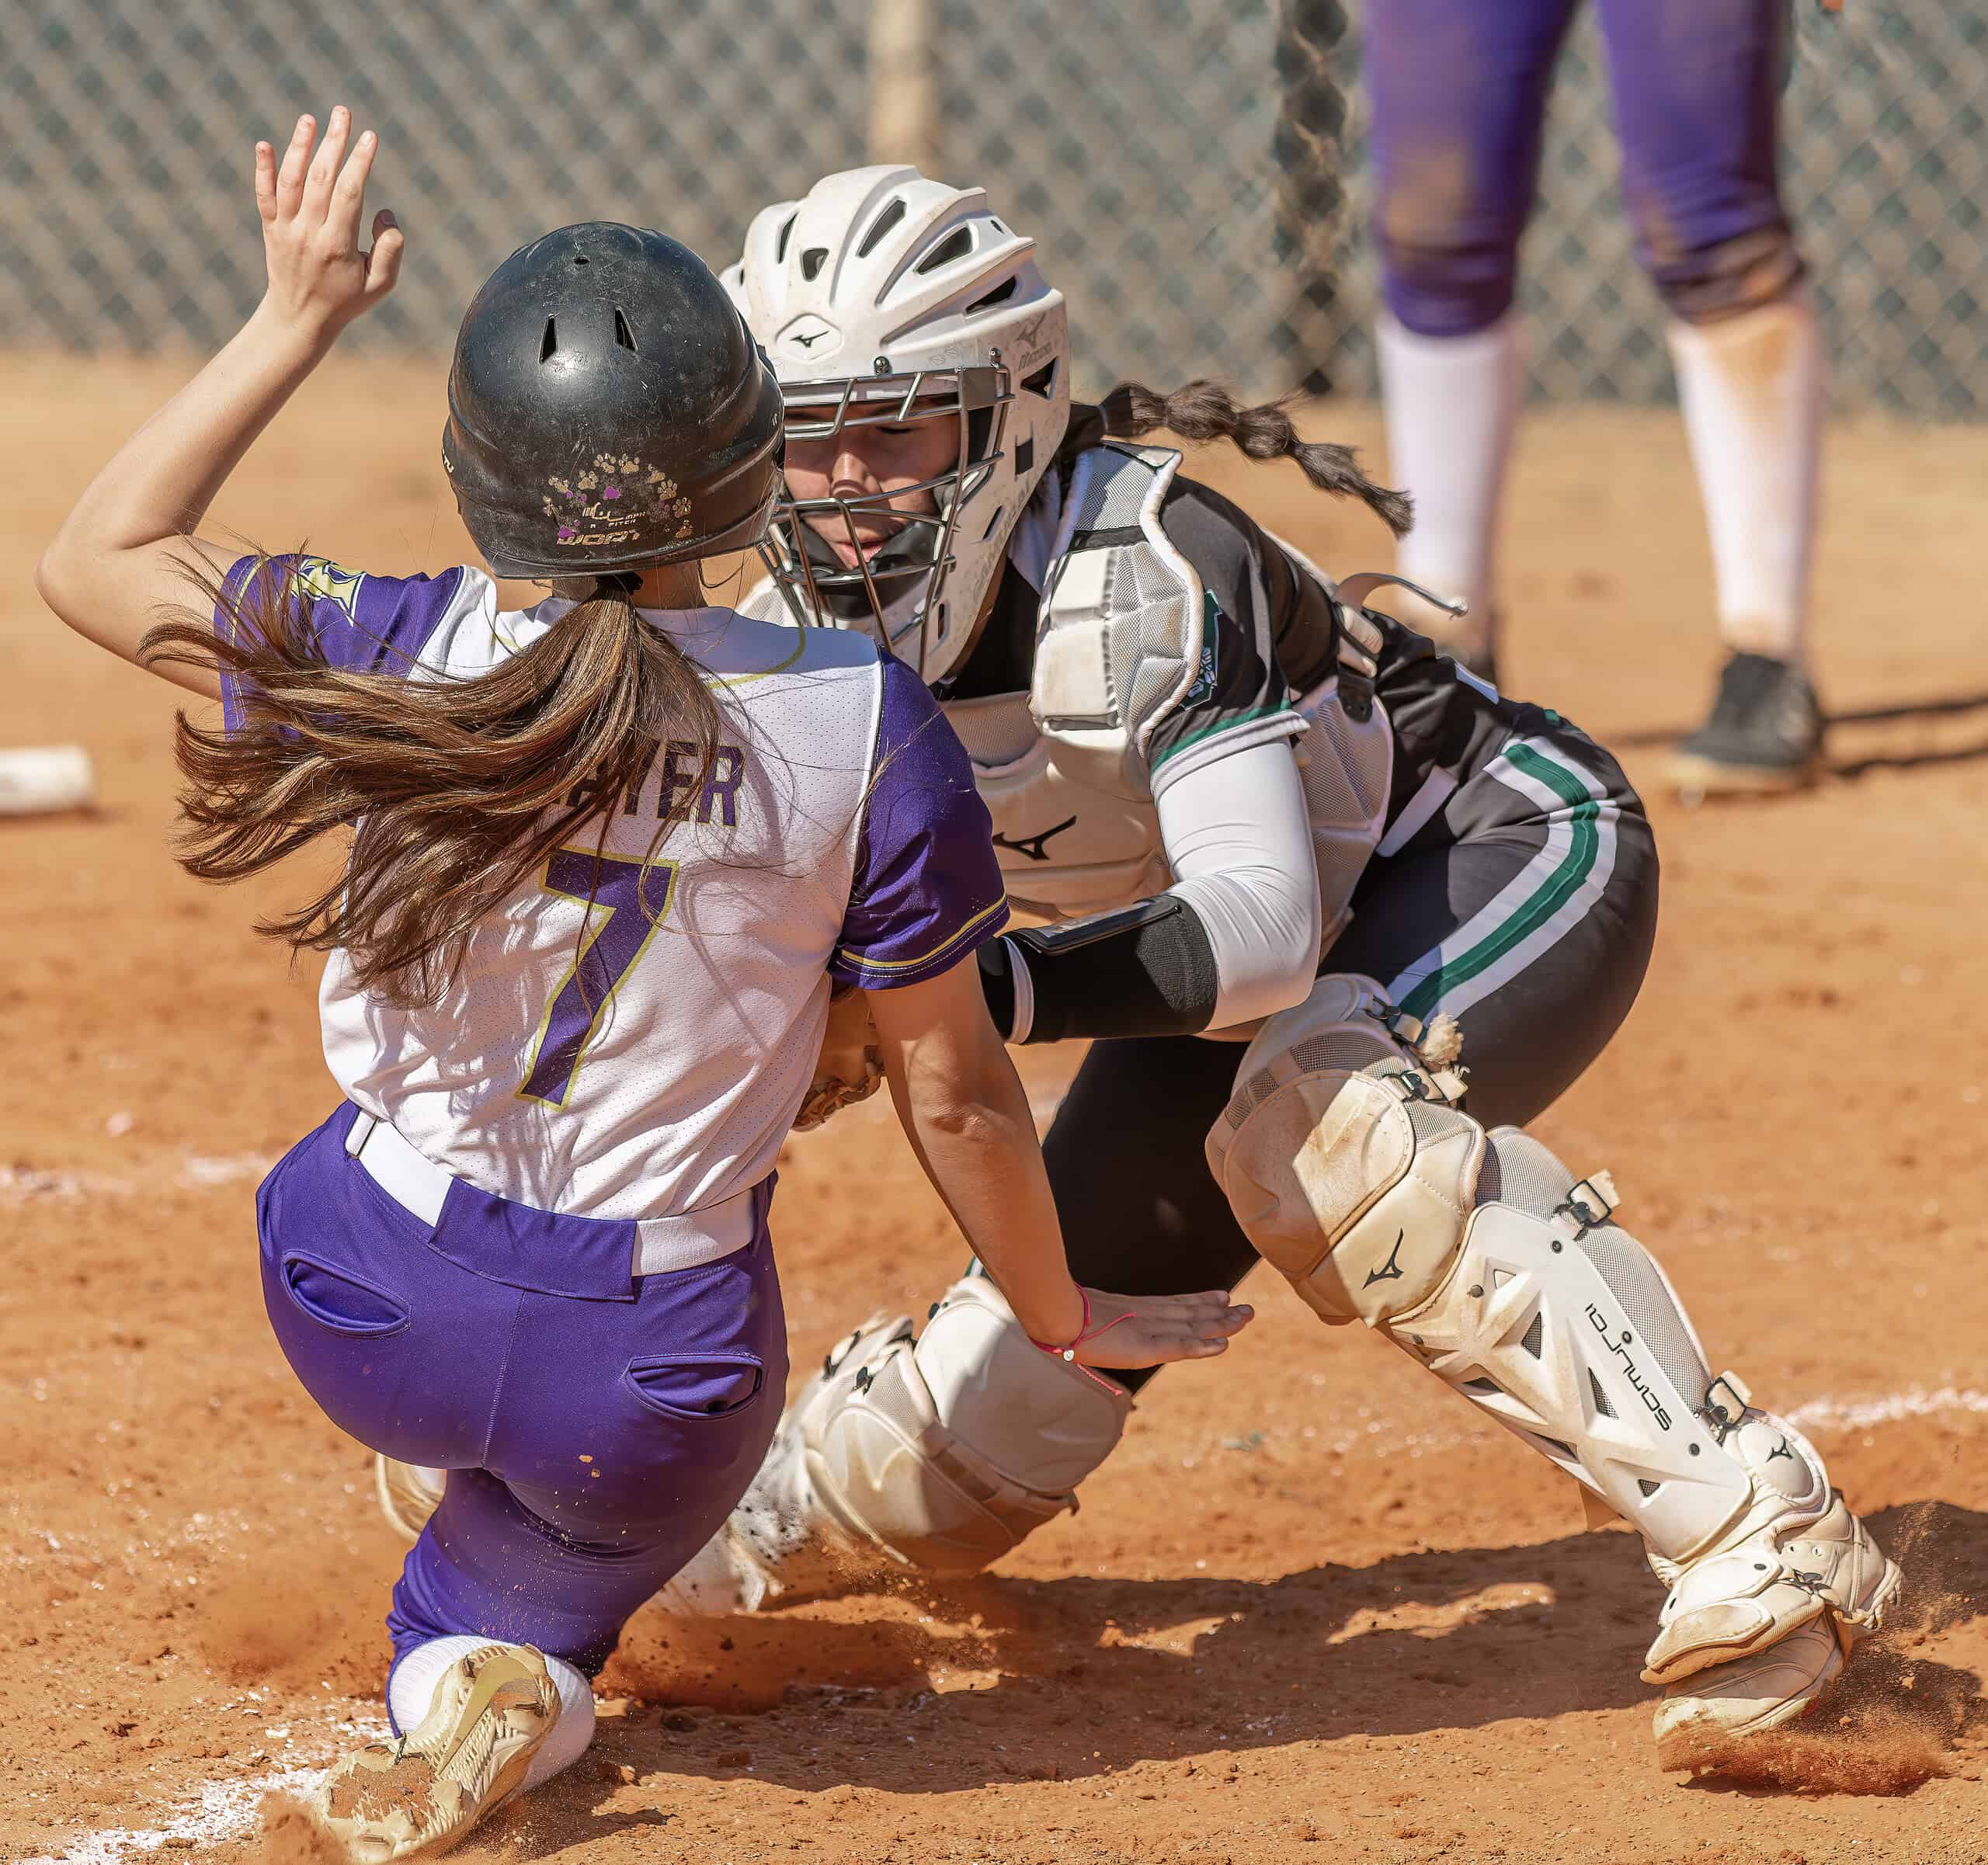 Hernando High’s Miley Mayer gets tagged out at home in the loss to Venice High in the Leopard Slam tournament at Tom Varn Park. [Photo by Joe DiCristofalo]